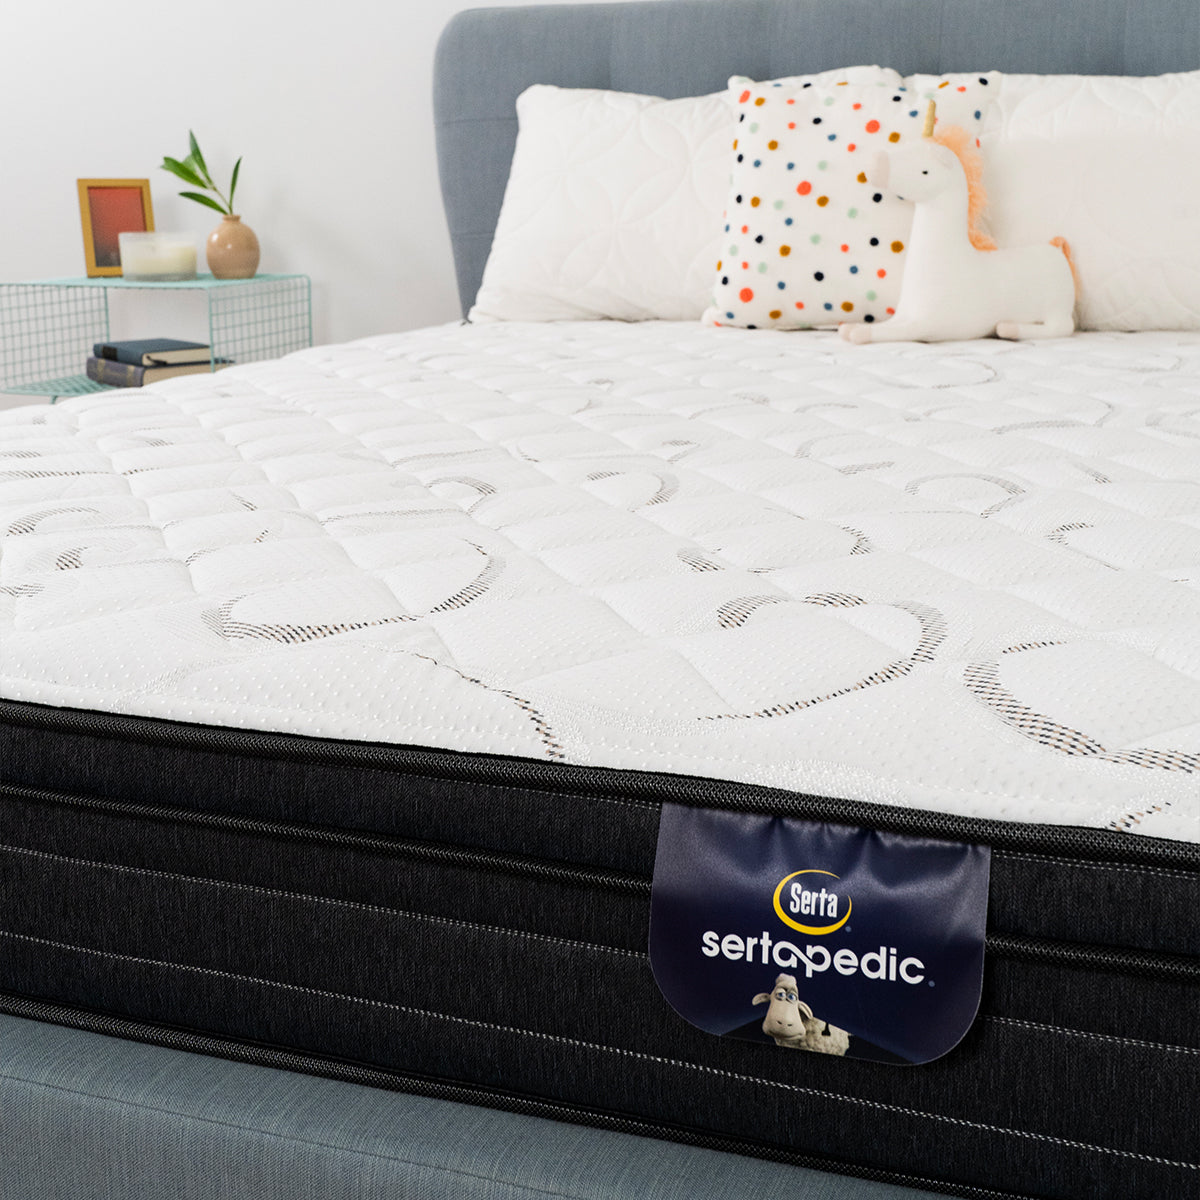 Sertapedic® Elkridge Euro Top Mattress by Serta Front View On Bed Frame Showing Fabric Detail And Product Tag Label